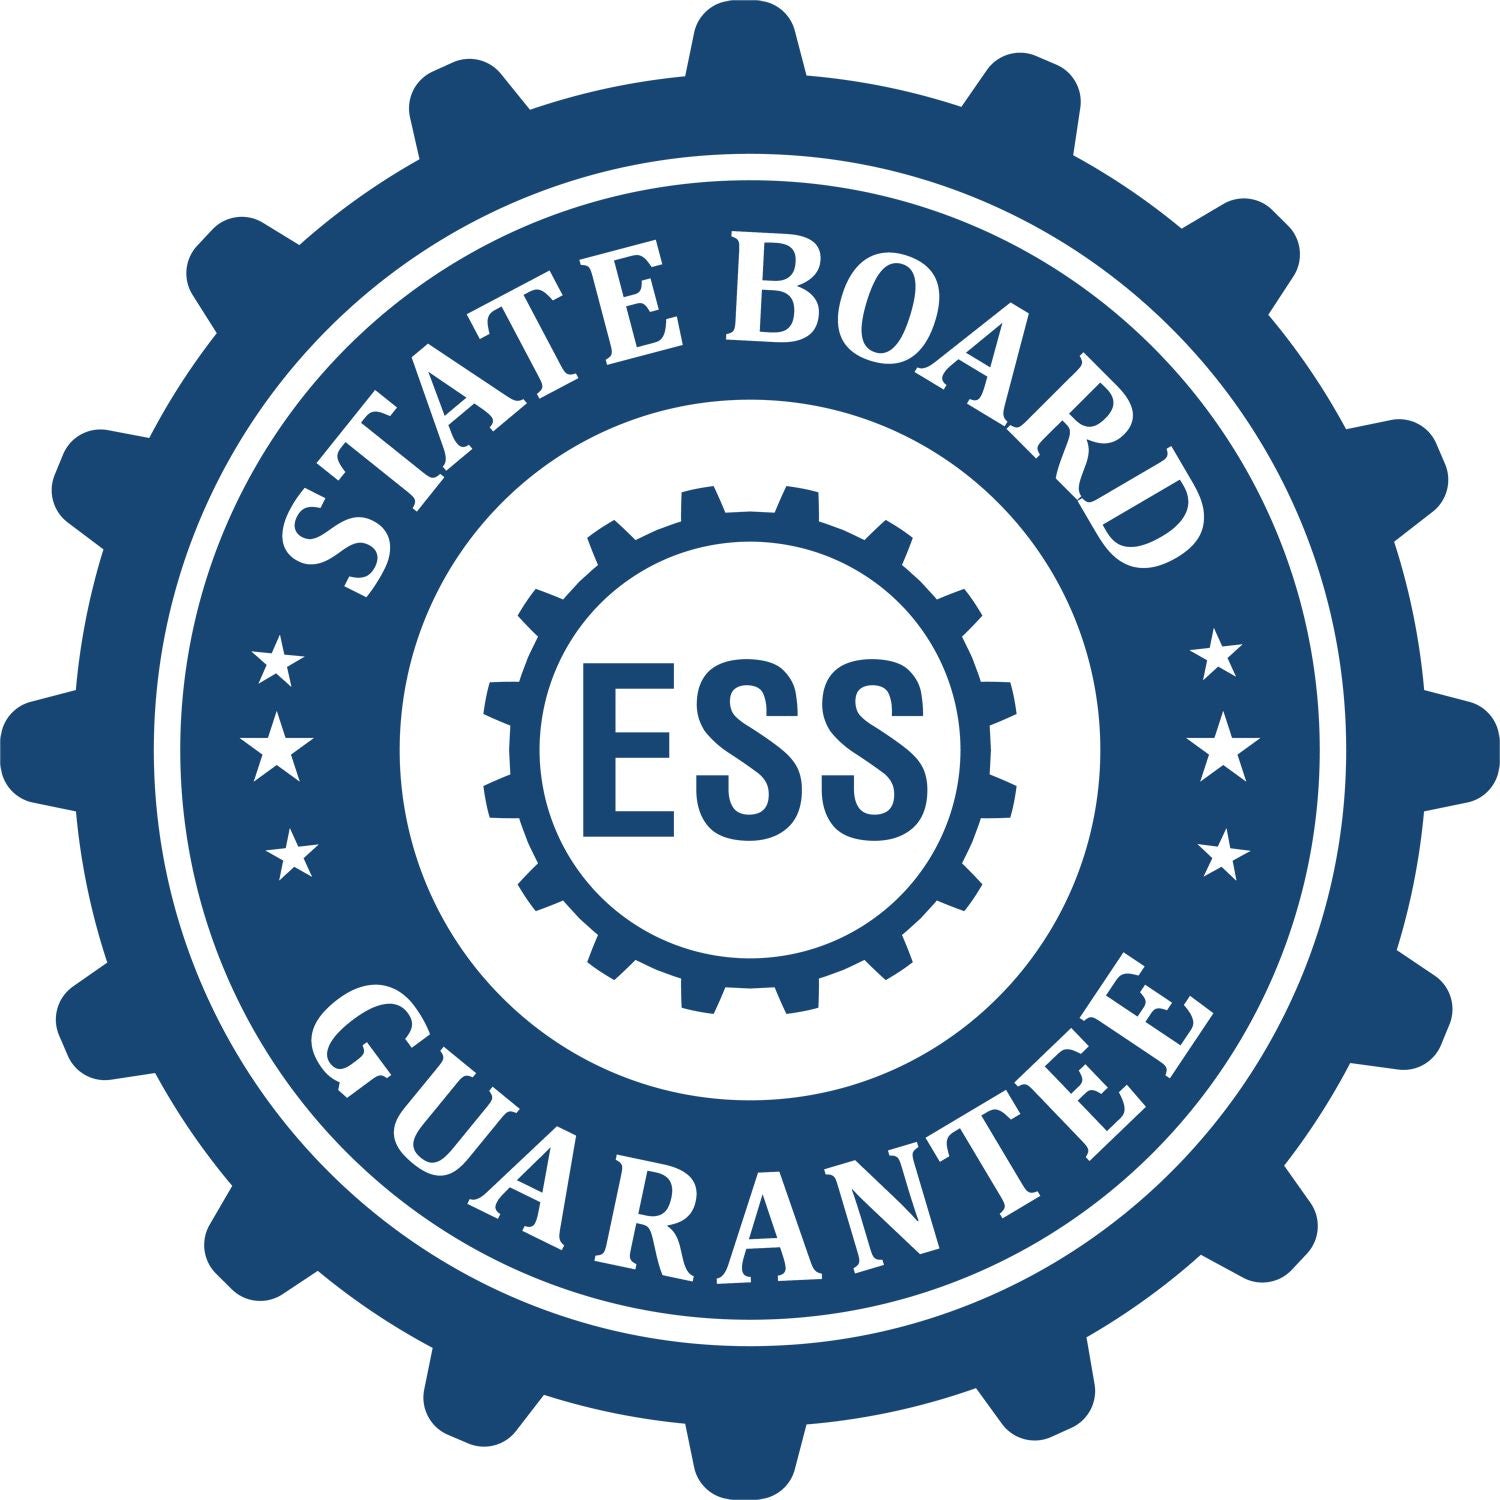 An emblem in a gear shape illustrating a state board guarantee for the Premium MaxLight Pre-Inked Michigan Landscape Architectural Stamp product.